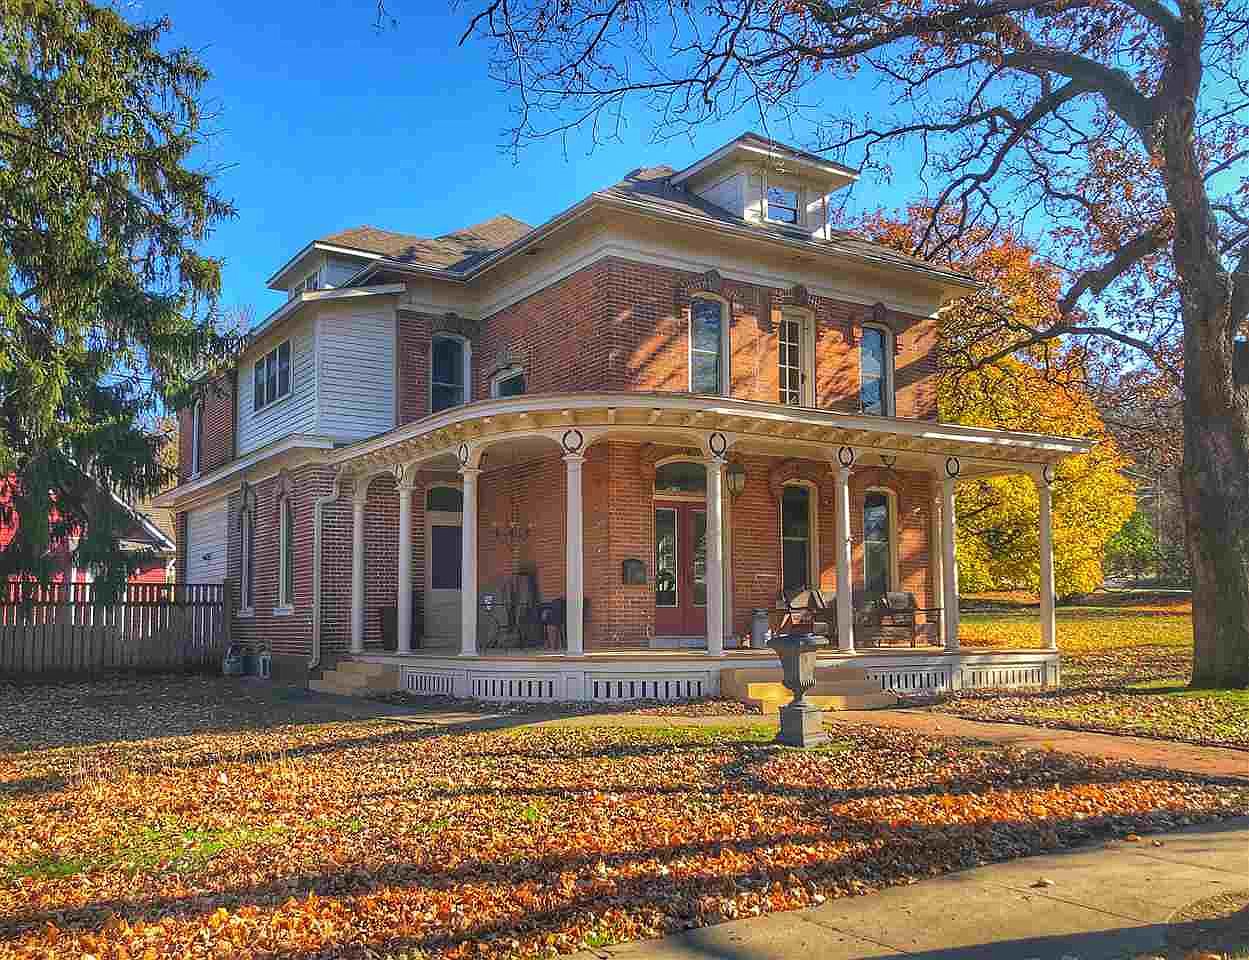 Historic Iowa Home of One of Von Maur Founders For Sale [PHOTOS]